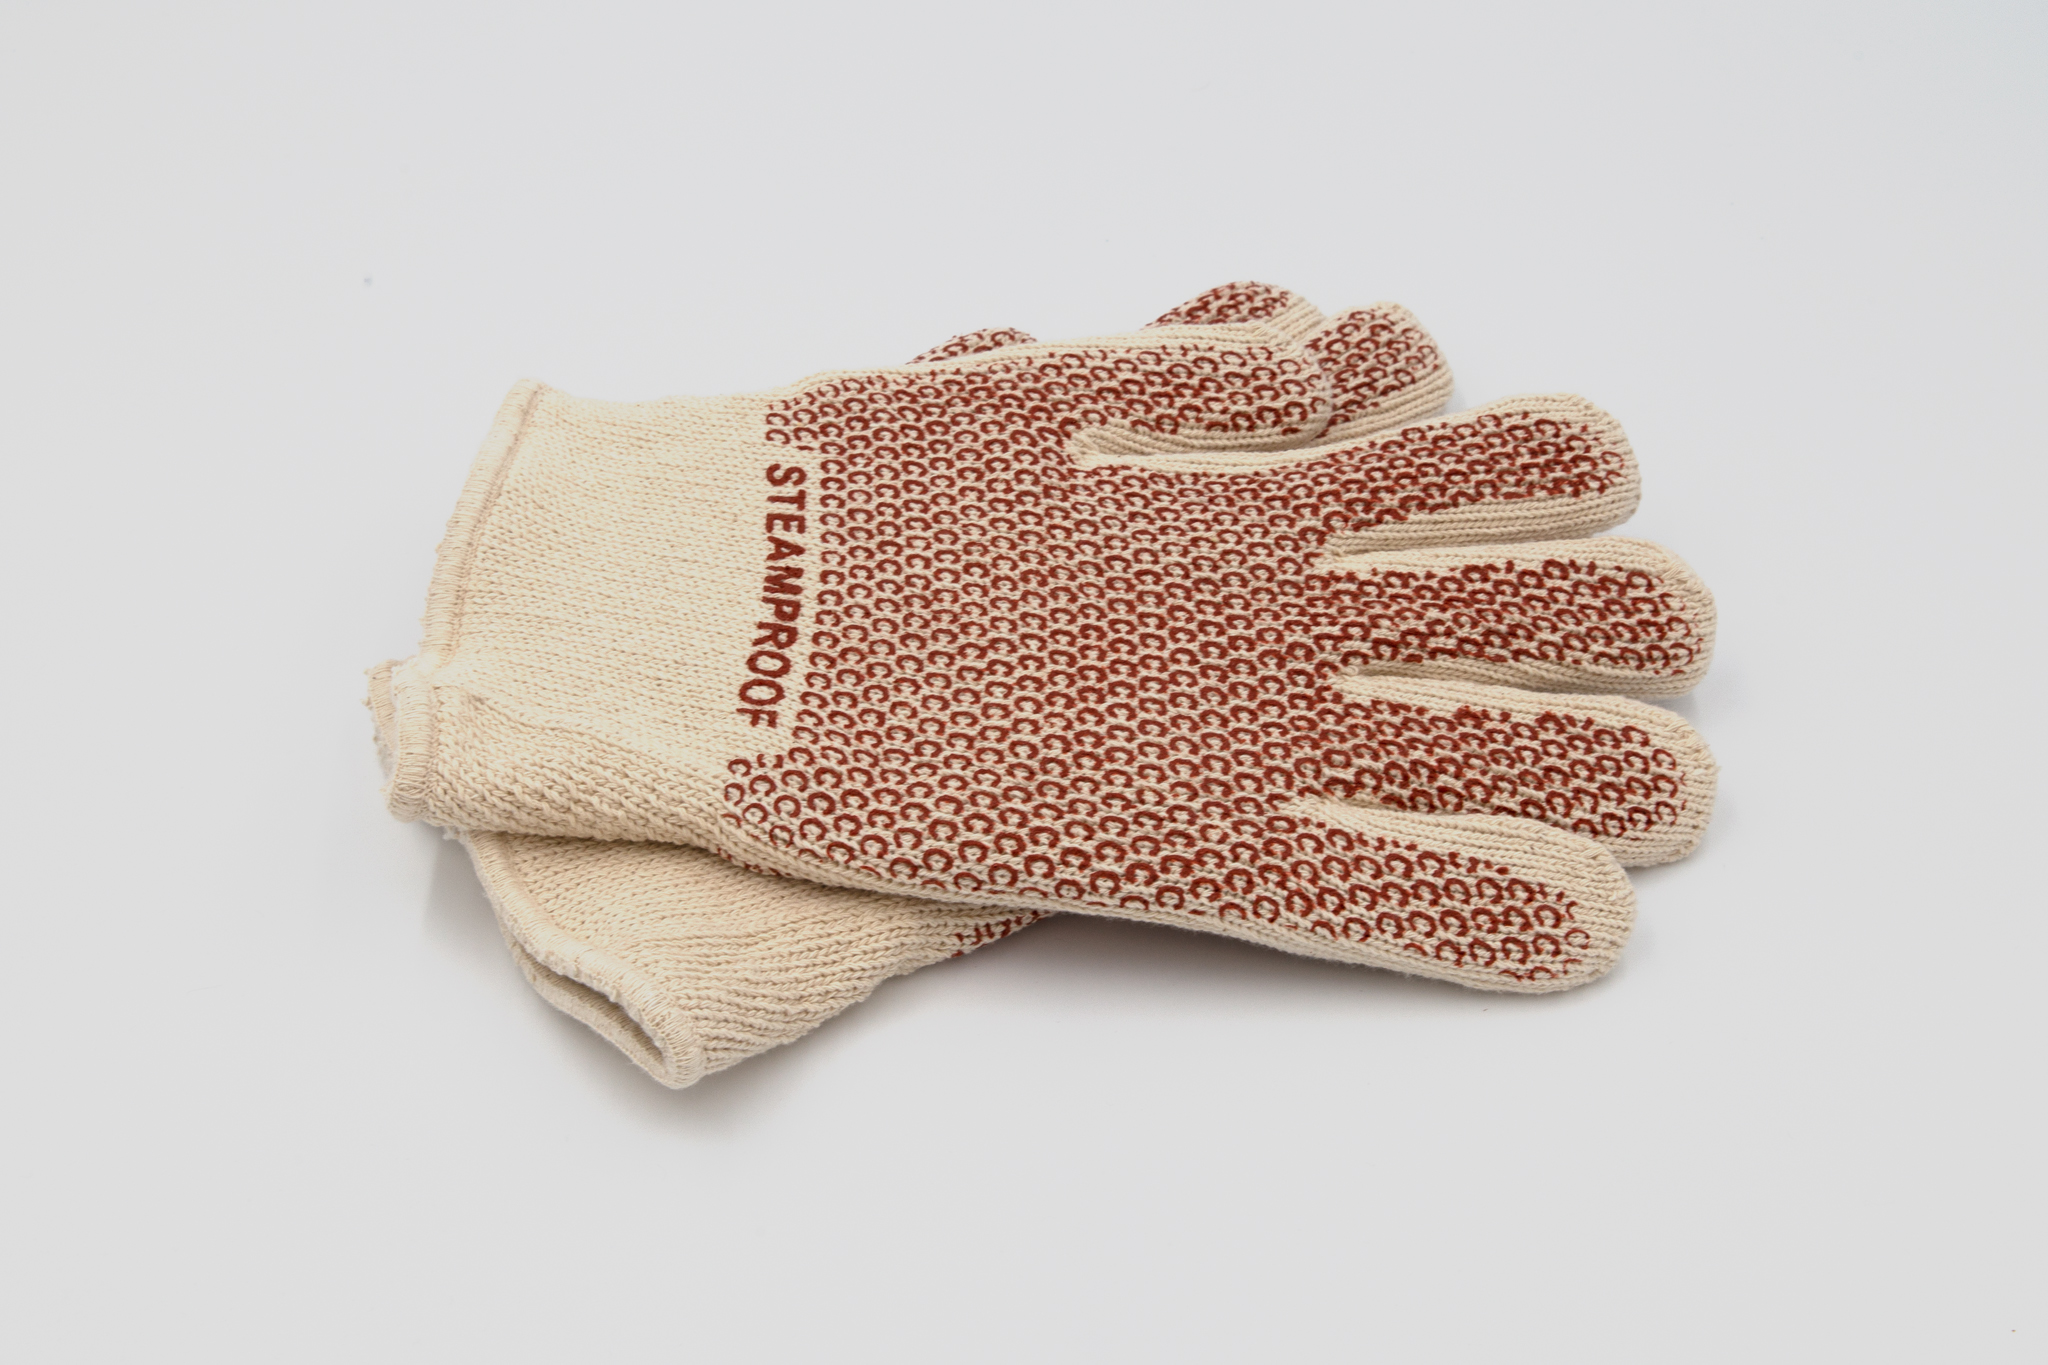 Beige and red gloves on a white background